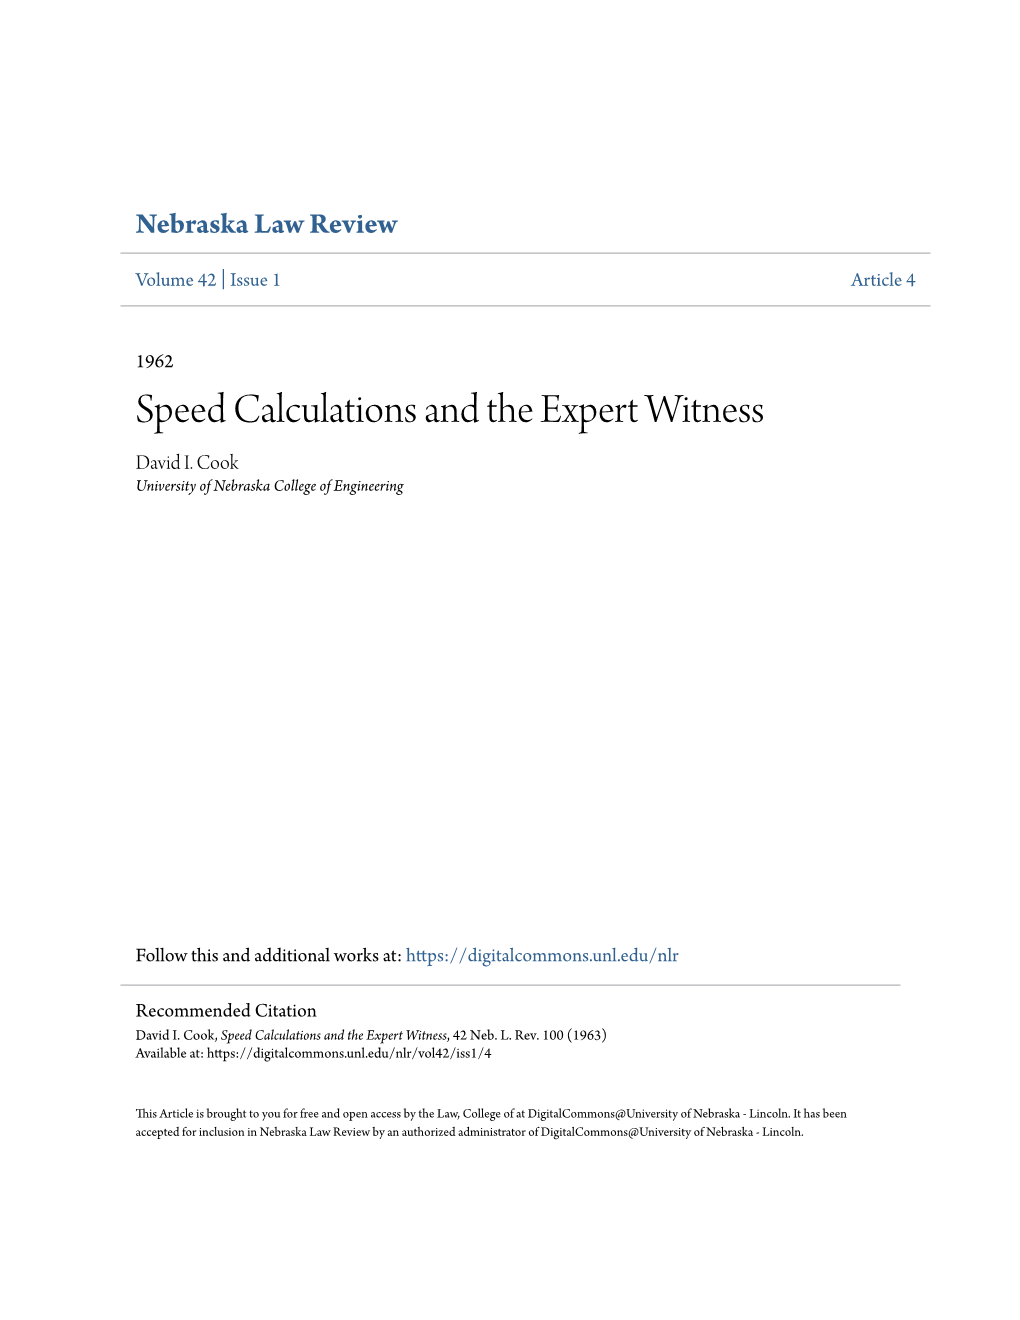 Speed Calculations and the Expert Witness David I